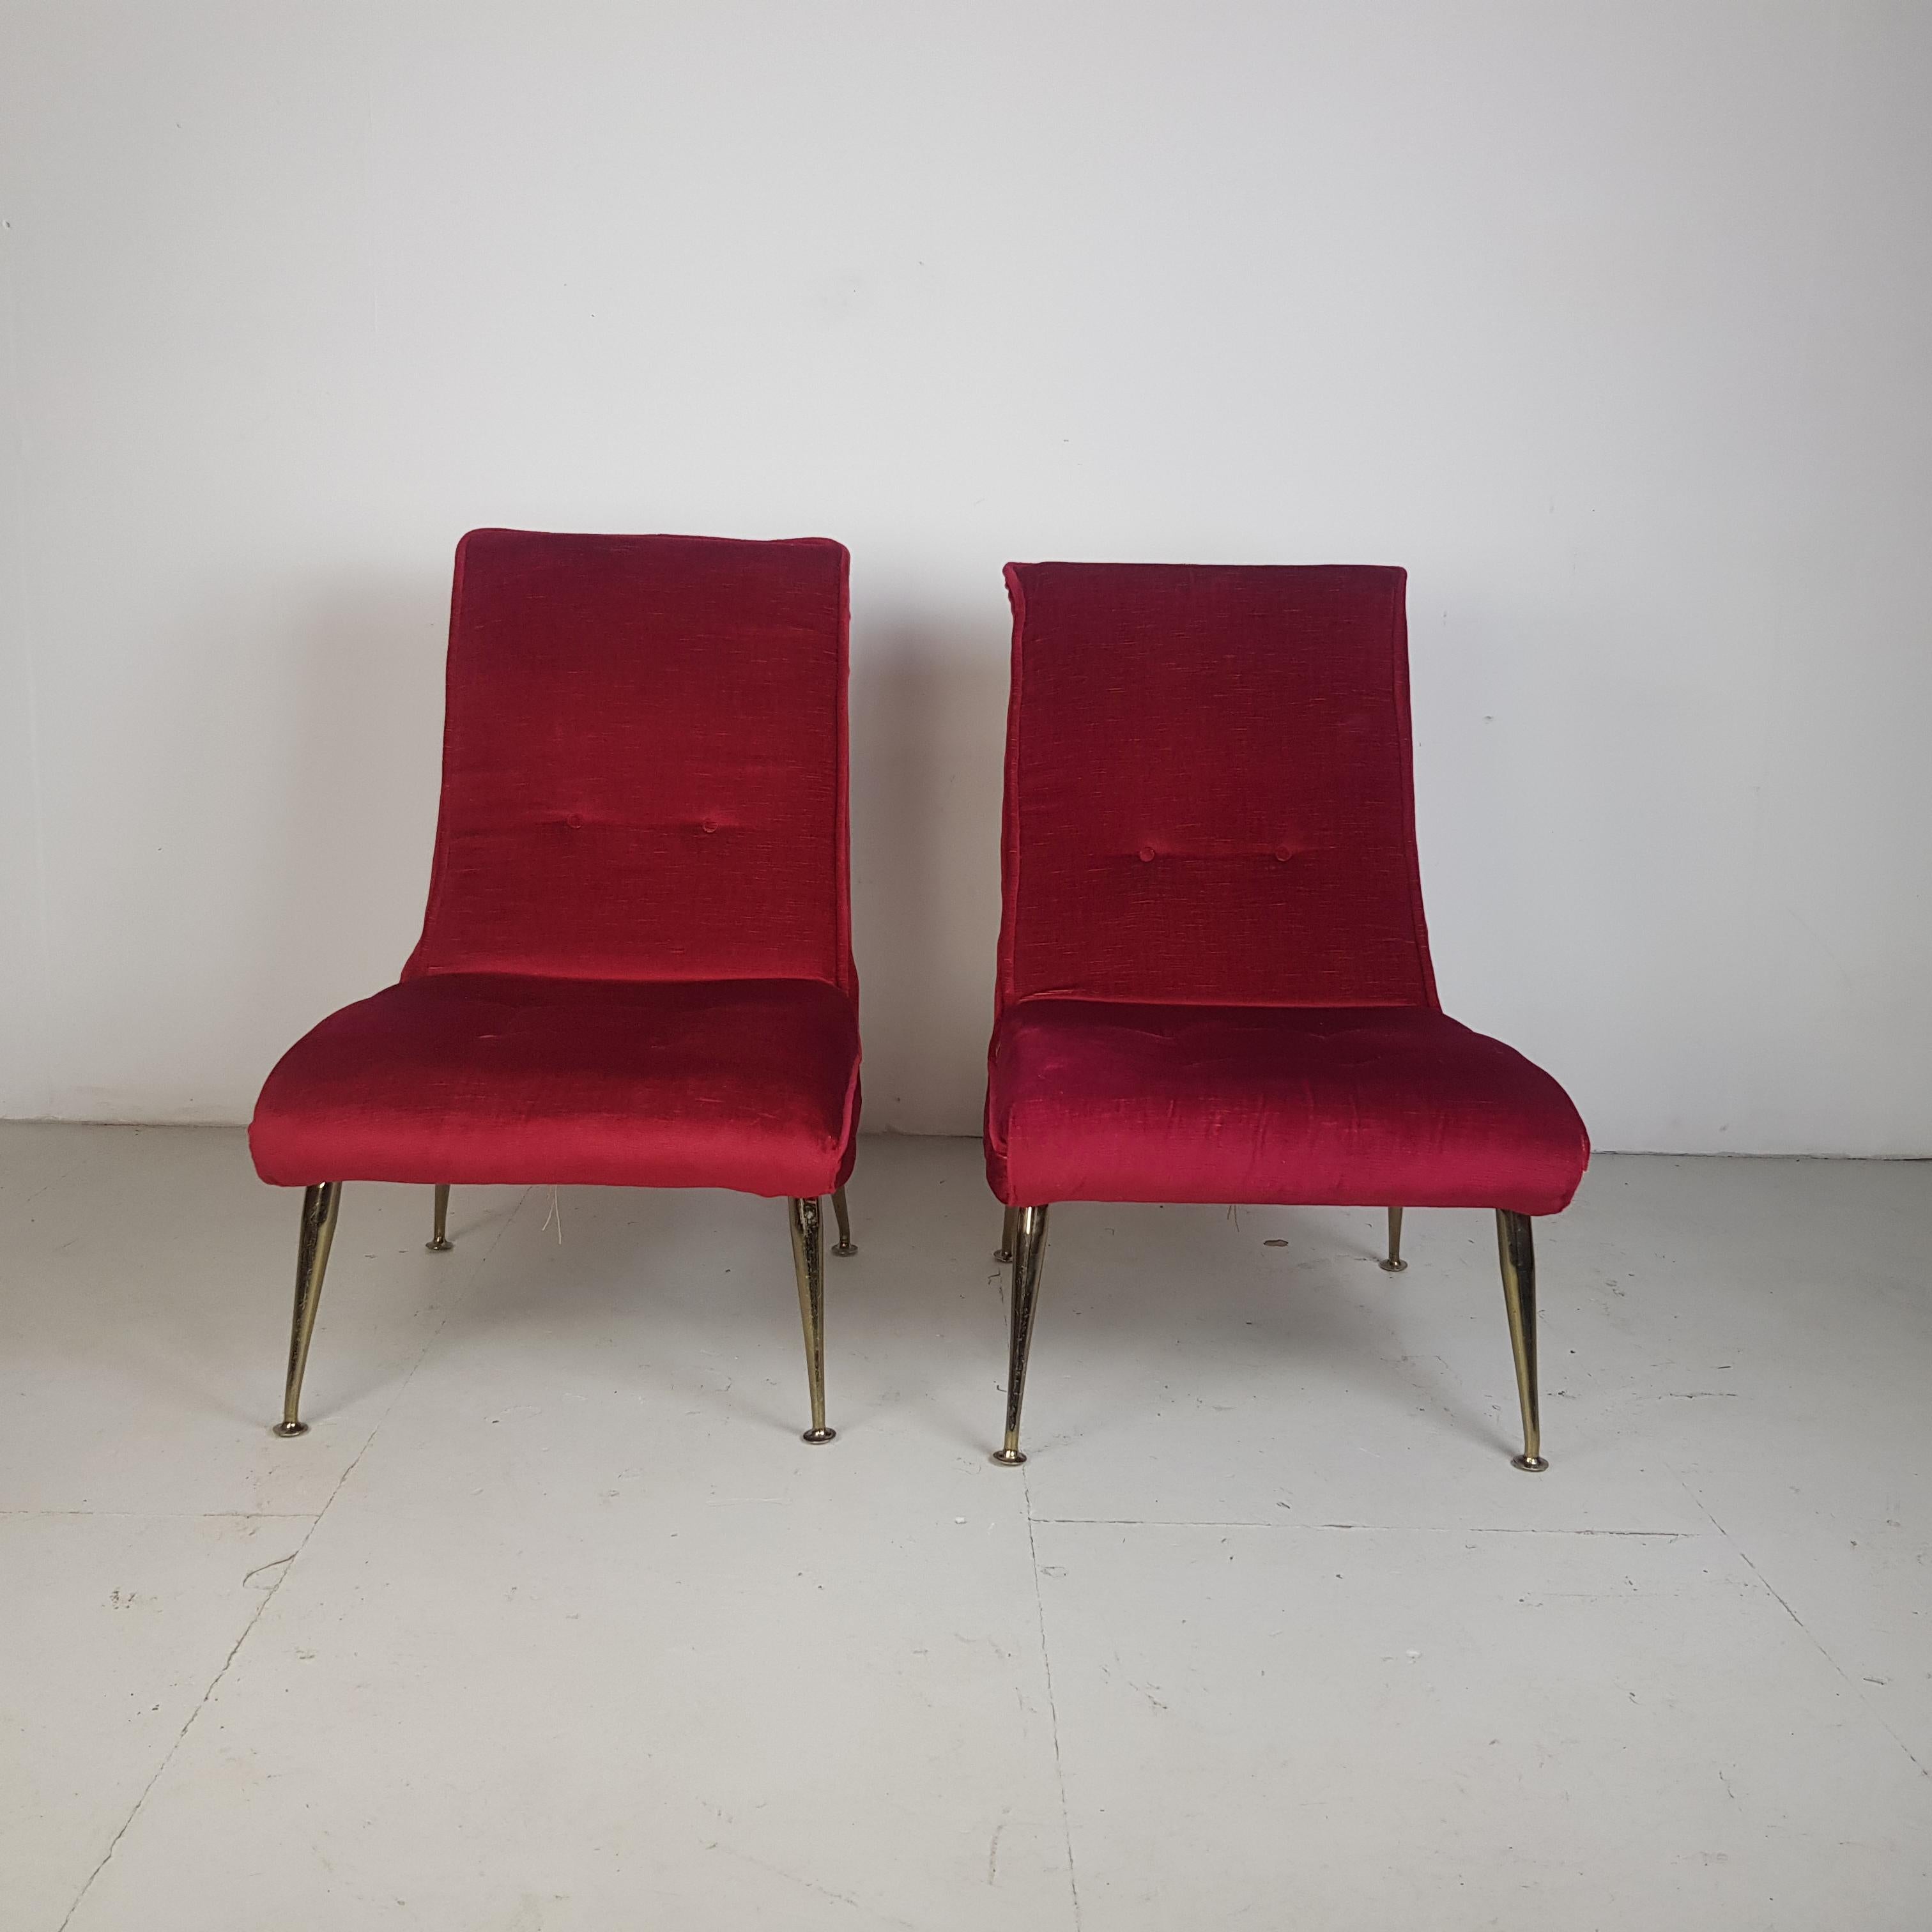 Italian Vintage Midcentury Pair of 1950s Red Velvet and Brass Cocktail Chairs For Sale